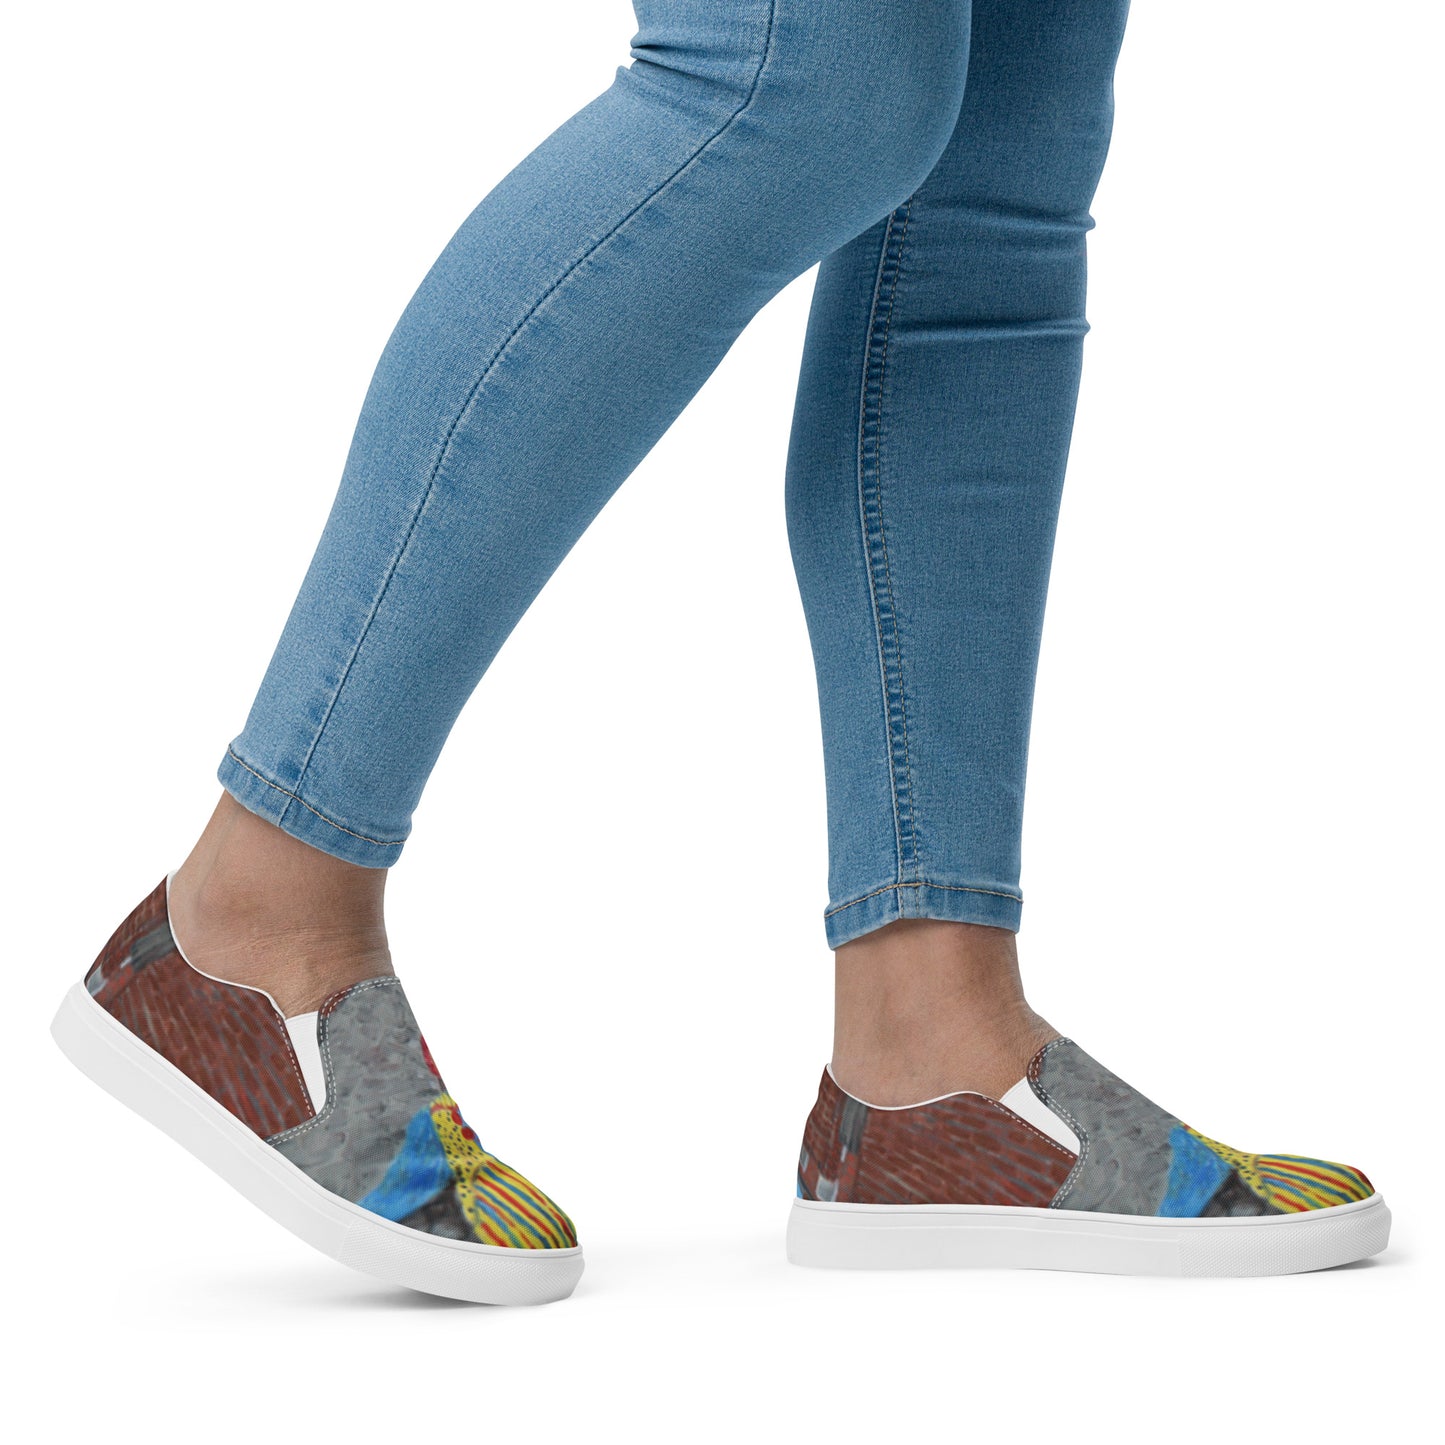 There's a Clown in the Entry - Women’s slip-on canvas shoes